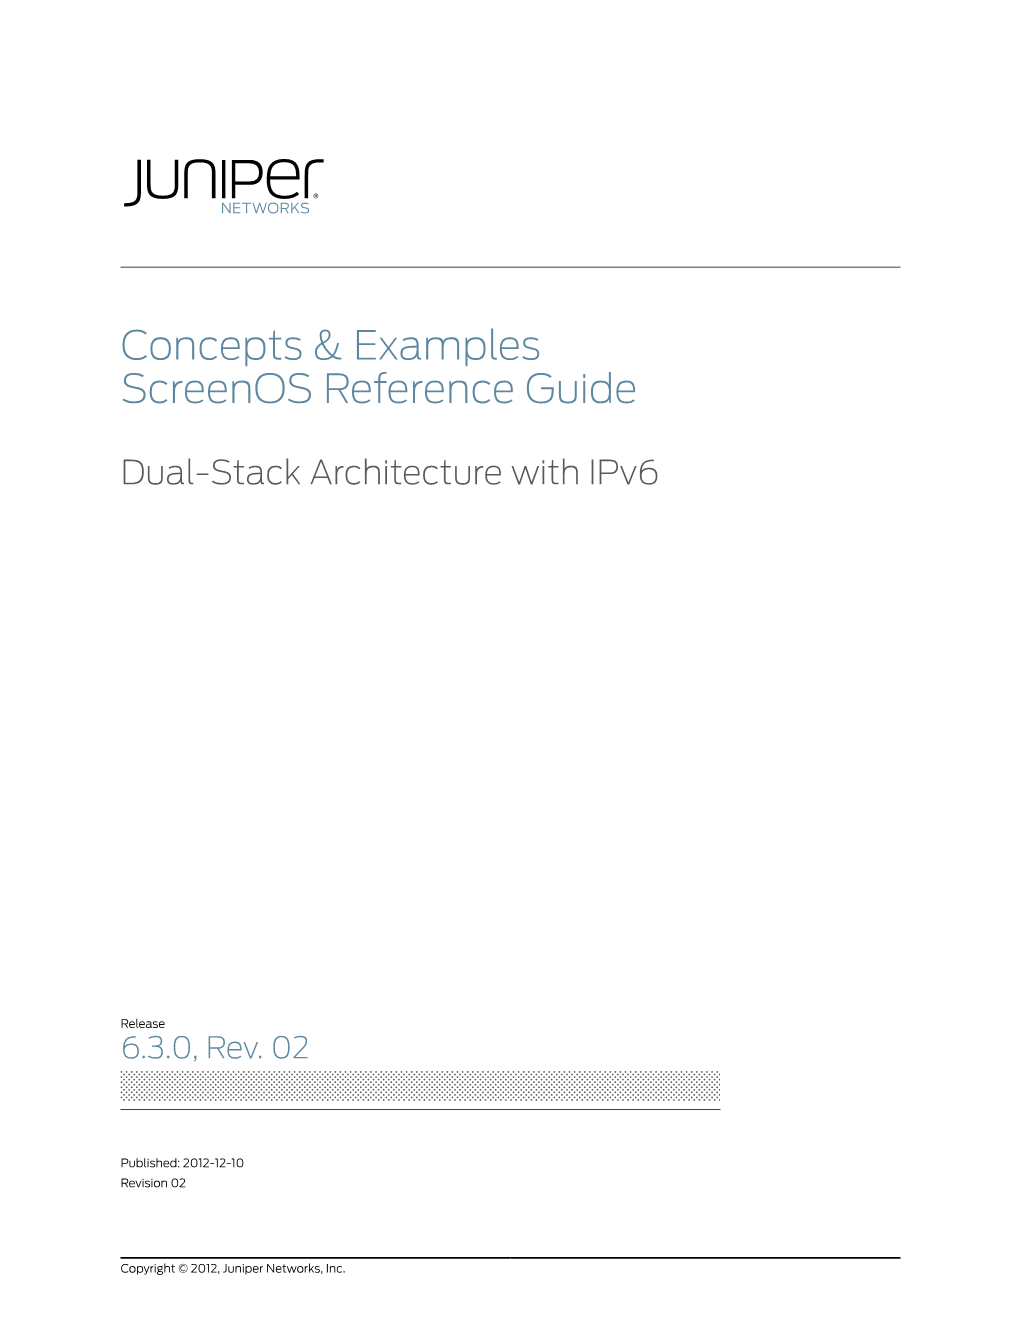 Dual-Stack Architecture with Ipv6